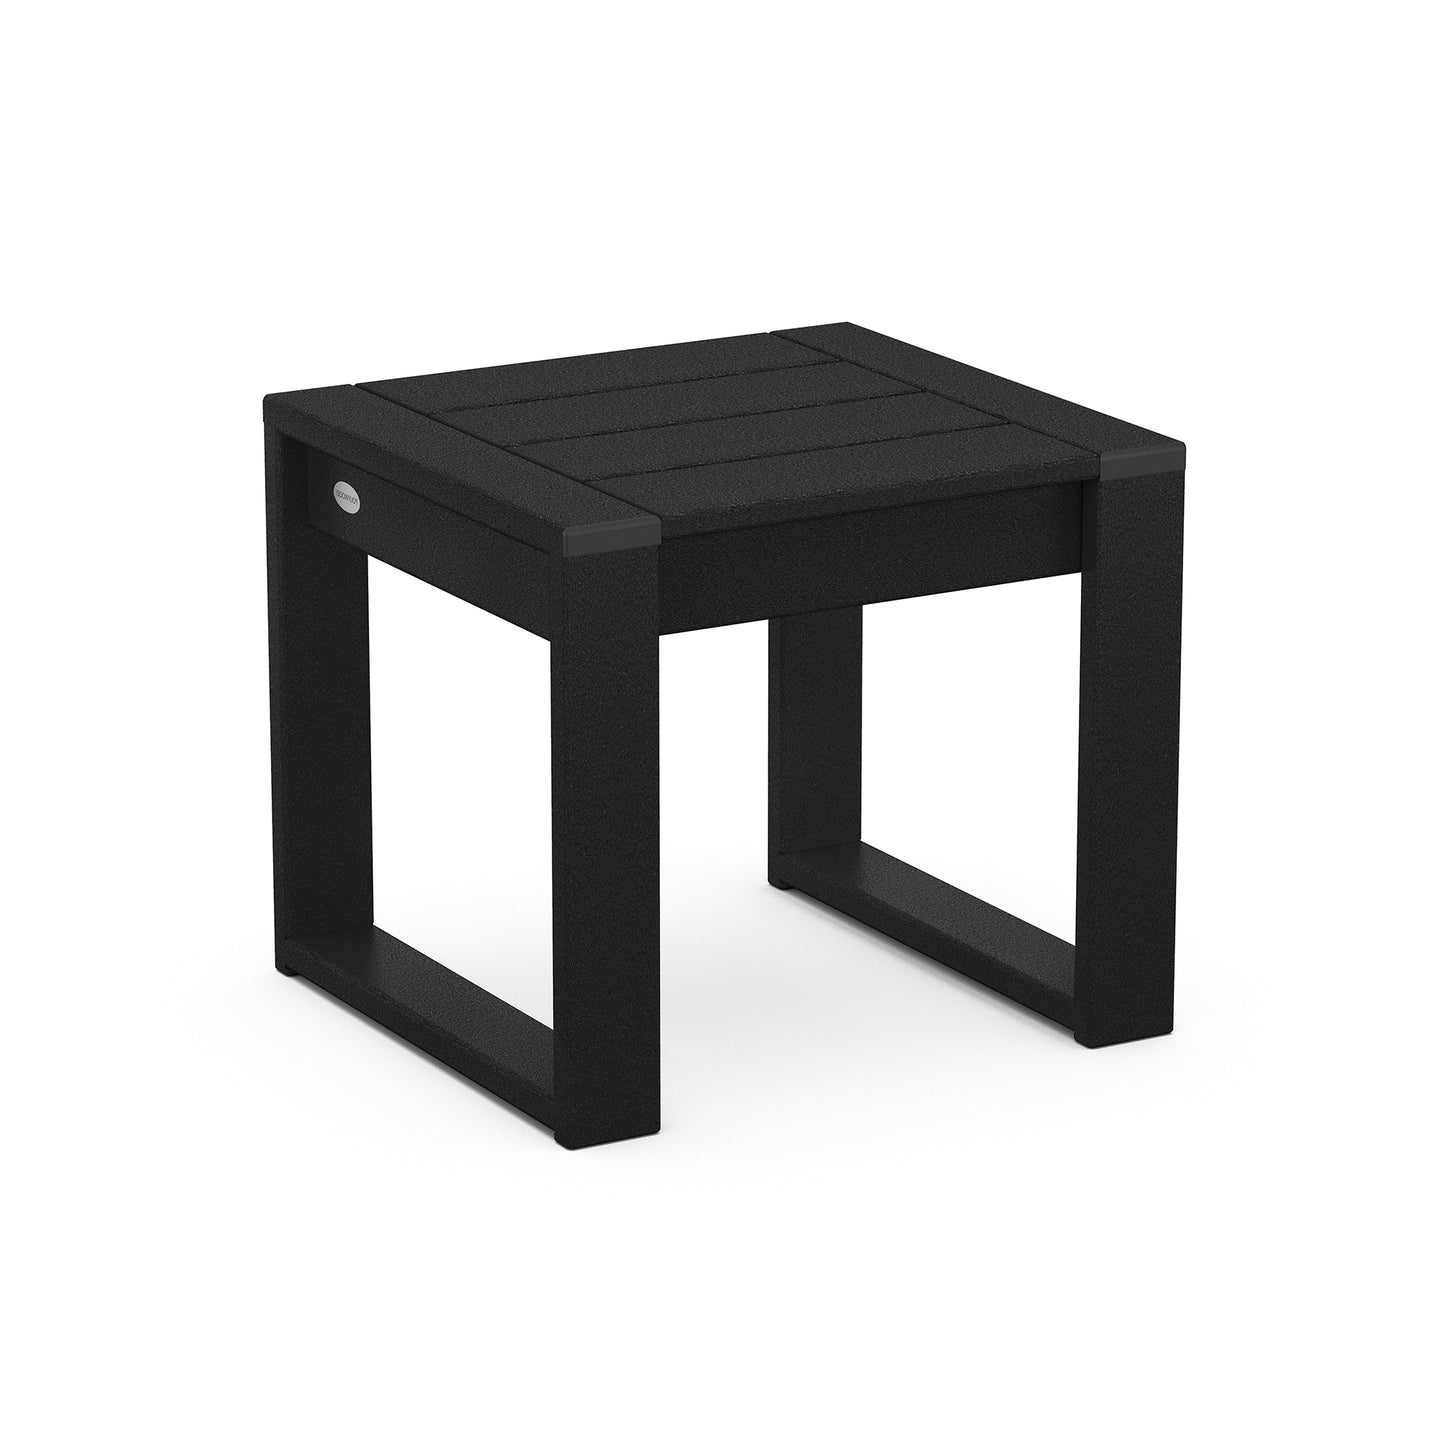 A 3D rendering of a small, modern black POLYWOOD EDGE End Table with a ribbed top design and square legs, shown against a plain white background.